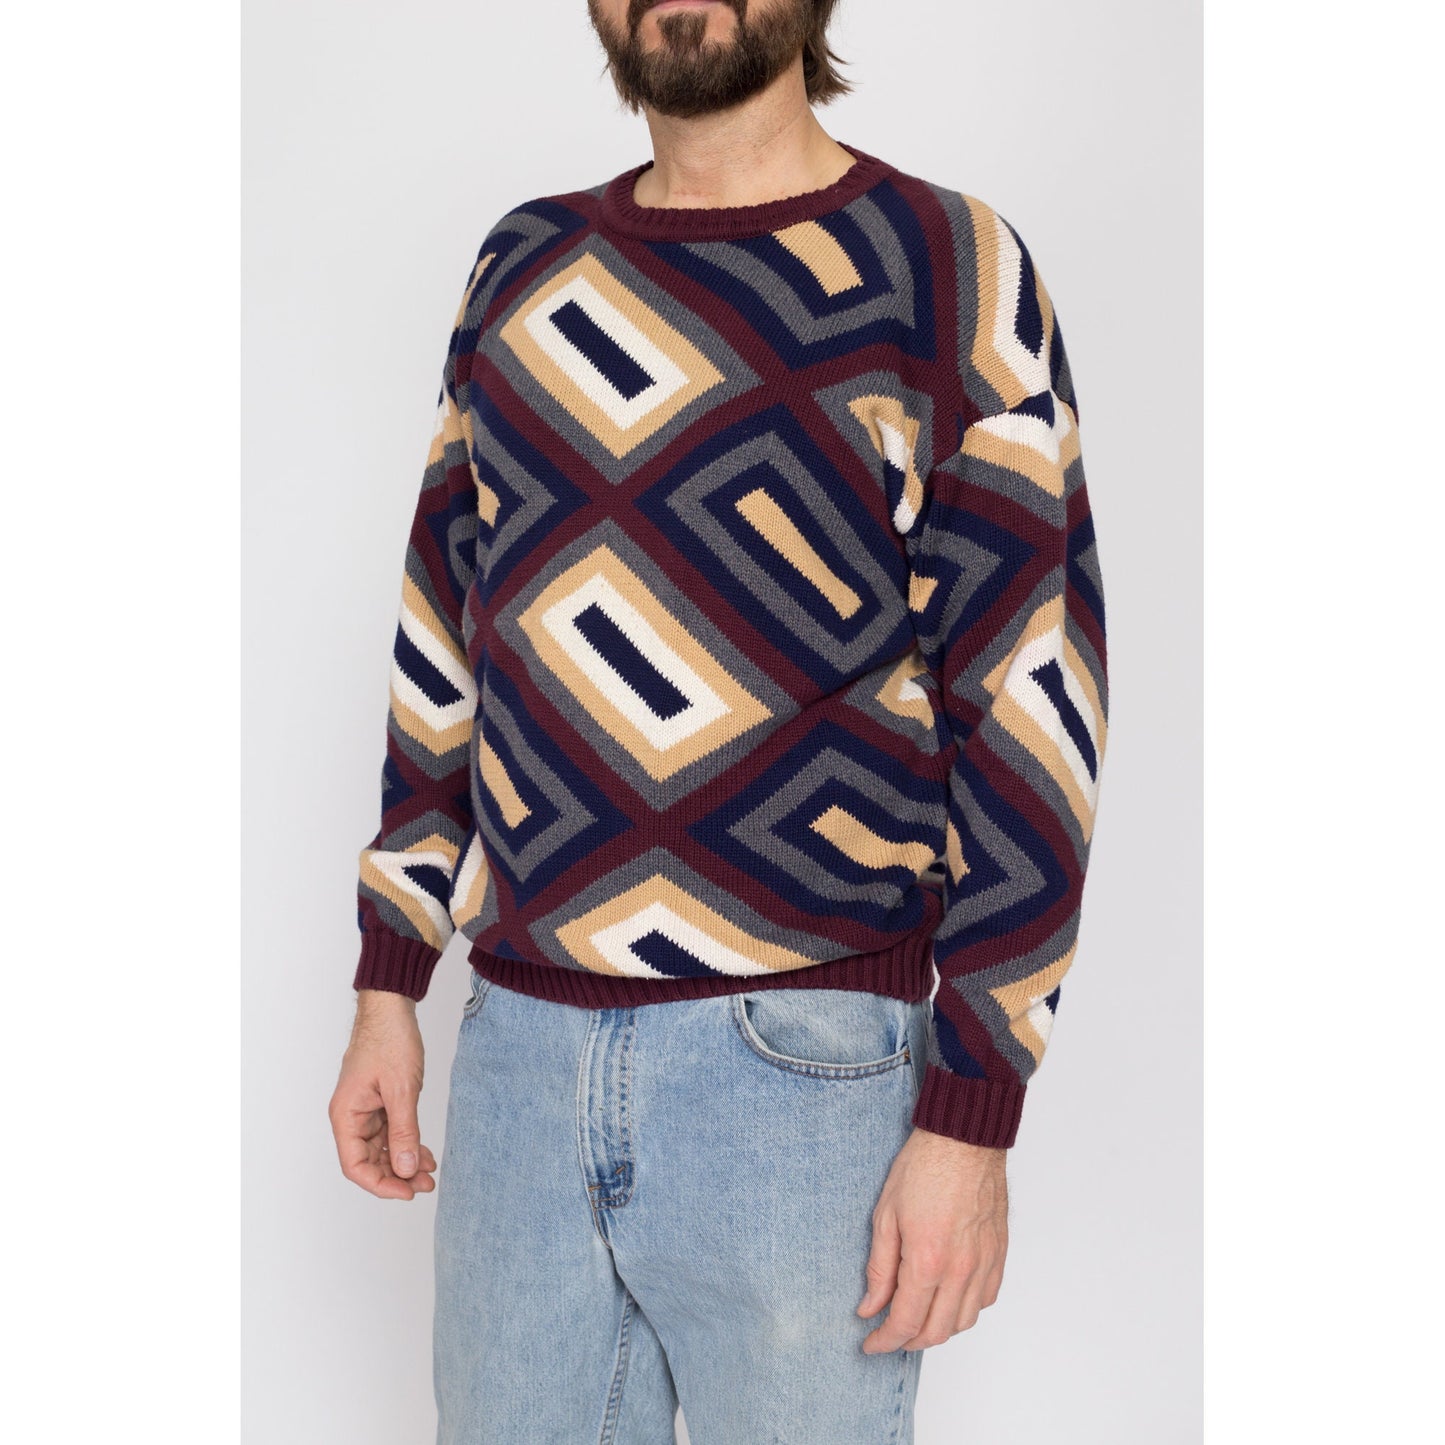 Med-Lrg 90s Geometric Earth Tone Knit Sweater | Vintage Henry Grethel Cotton Slouchy Streetwear Pullover